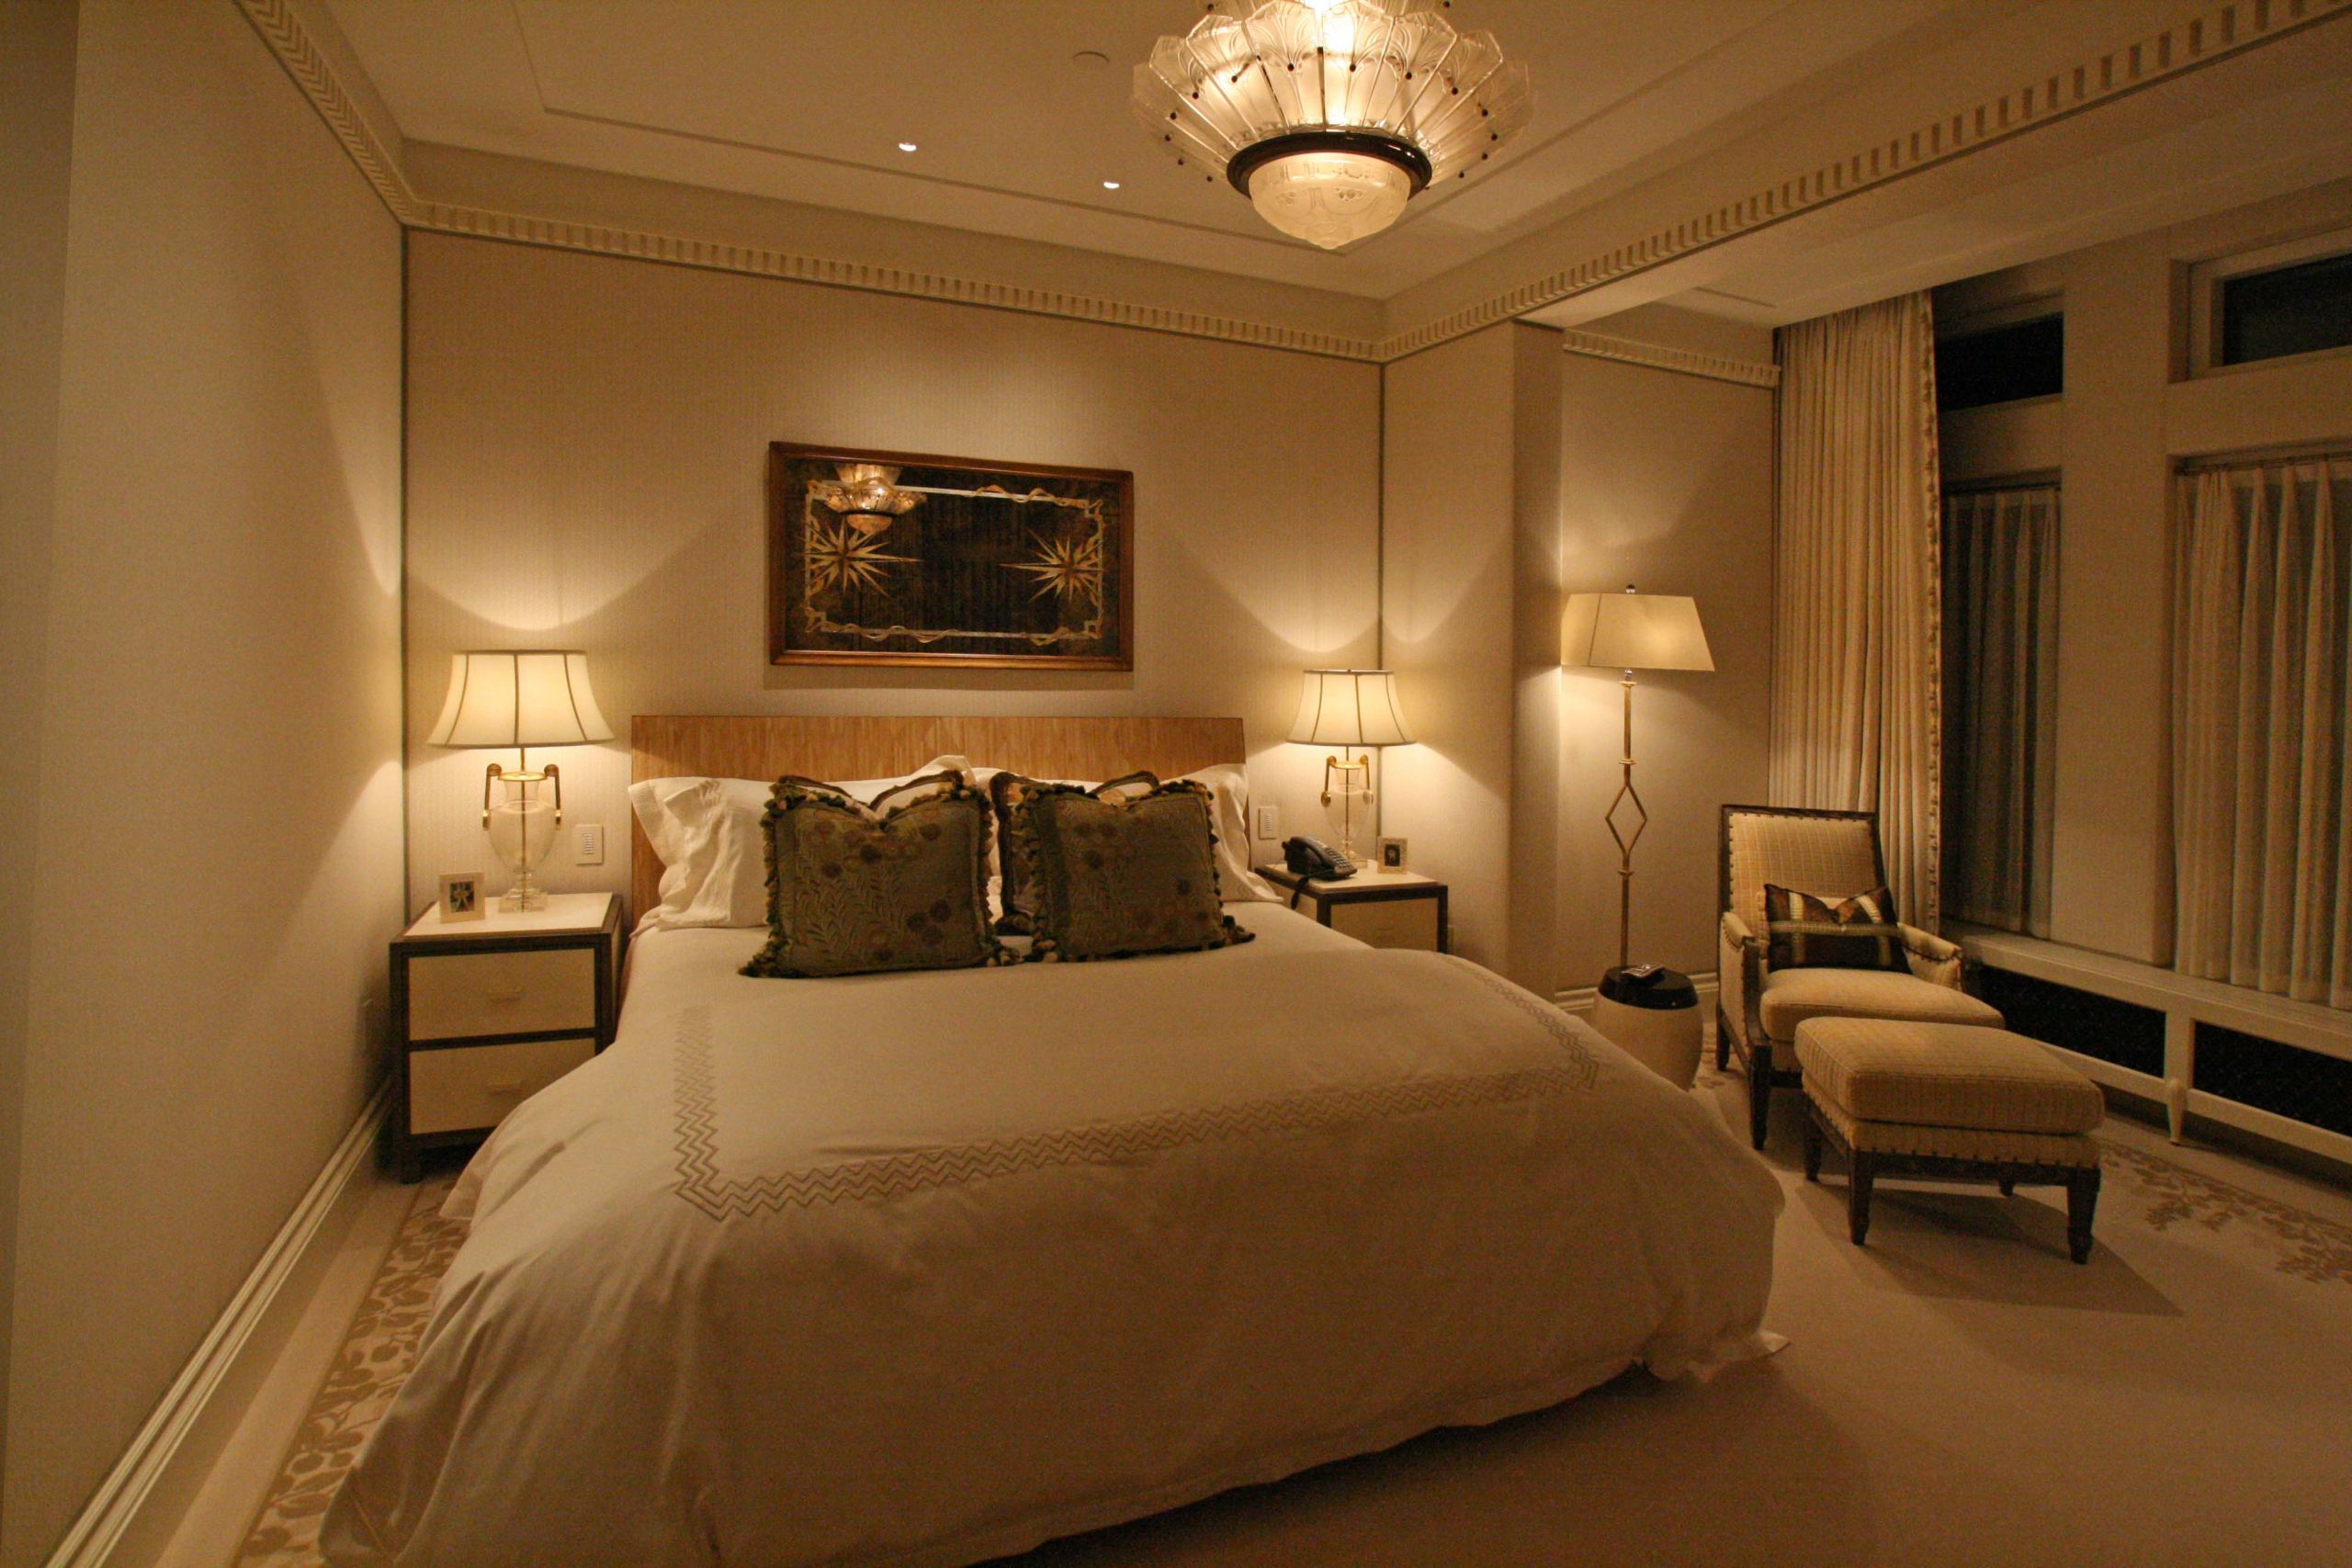 Chandelier Light For Bedroom
 Here are the Best Lights that Create a Warm & Cosy Bedroom